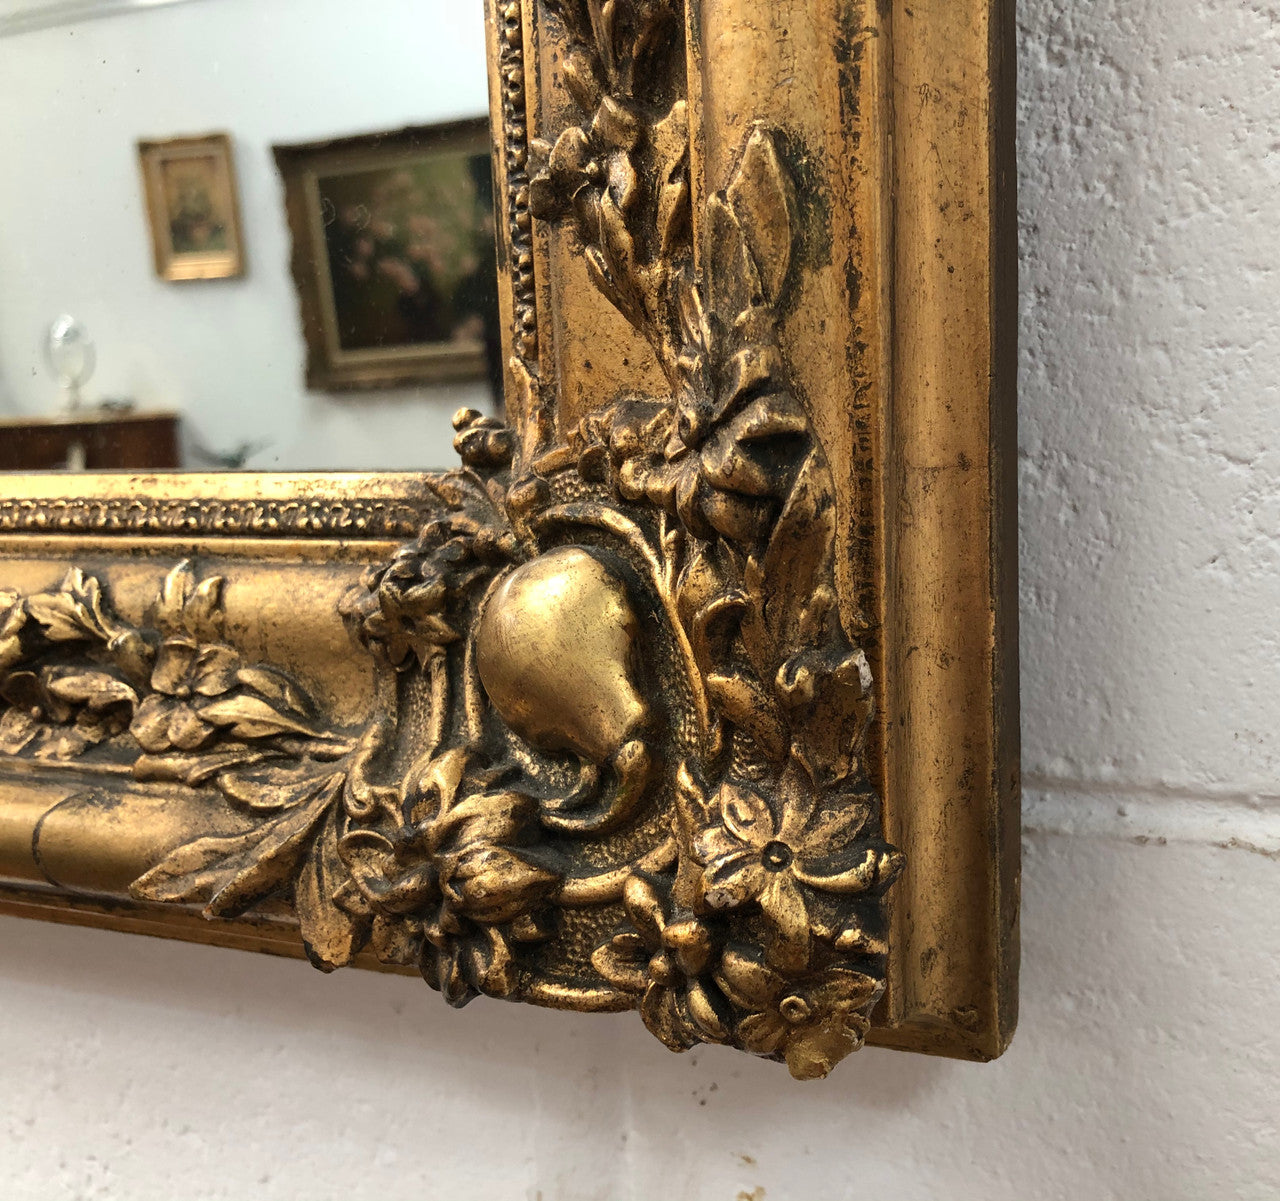 A Rare Early 19th Century French Easy To Place Mirror